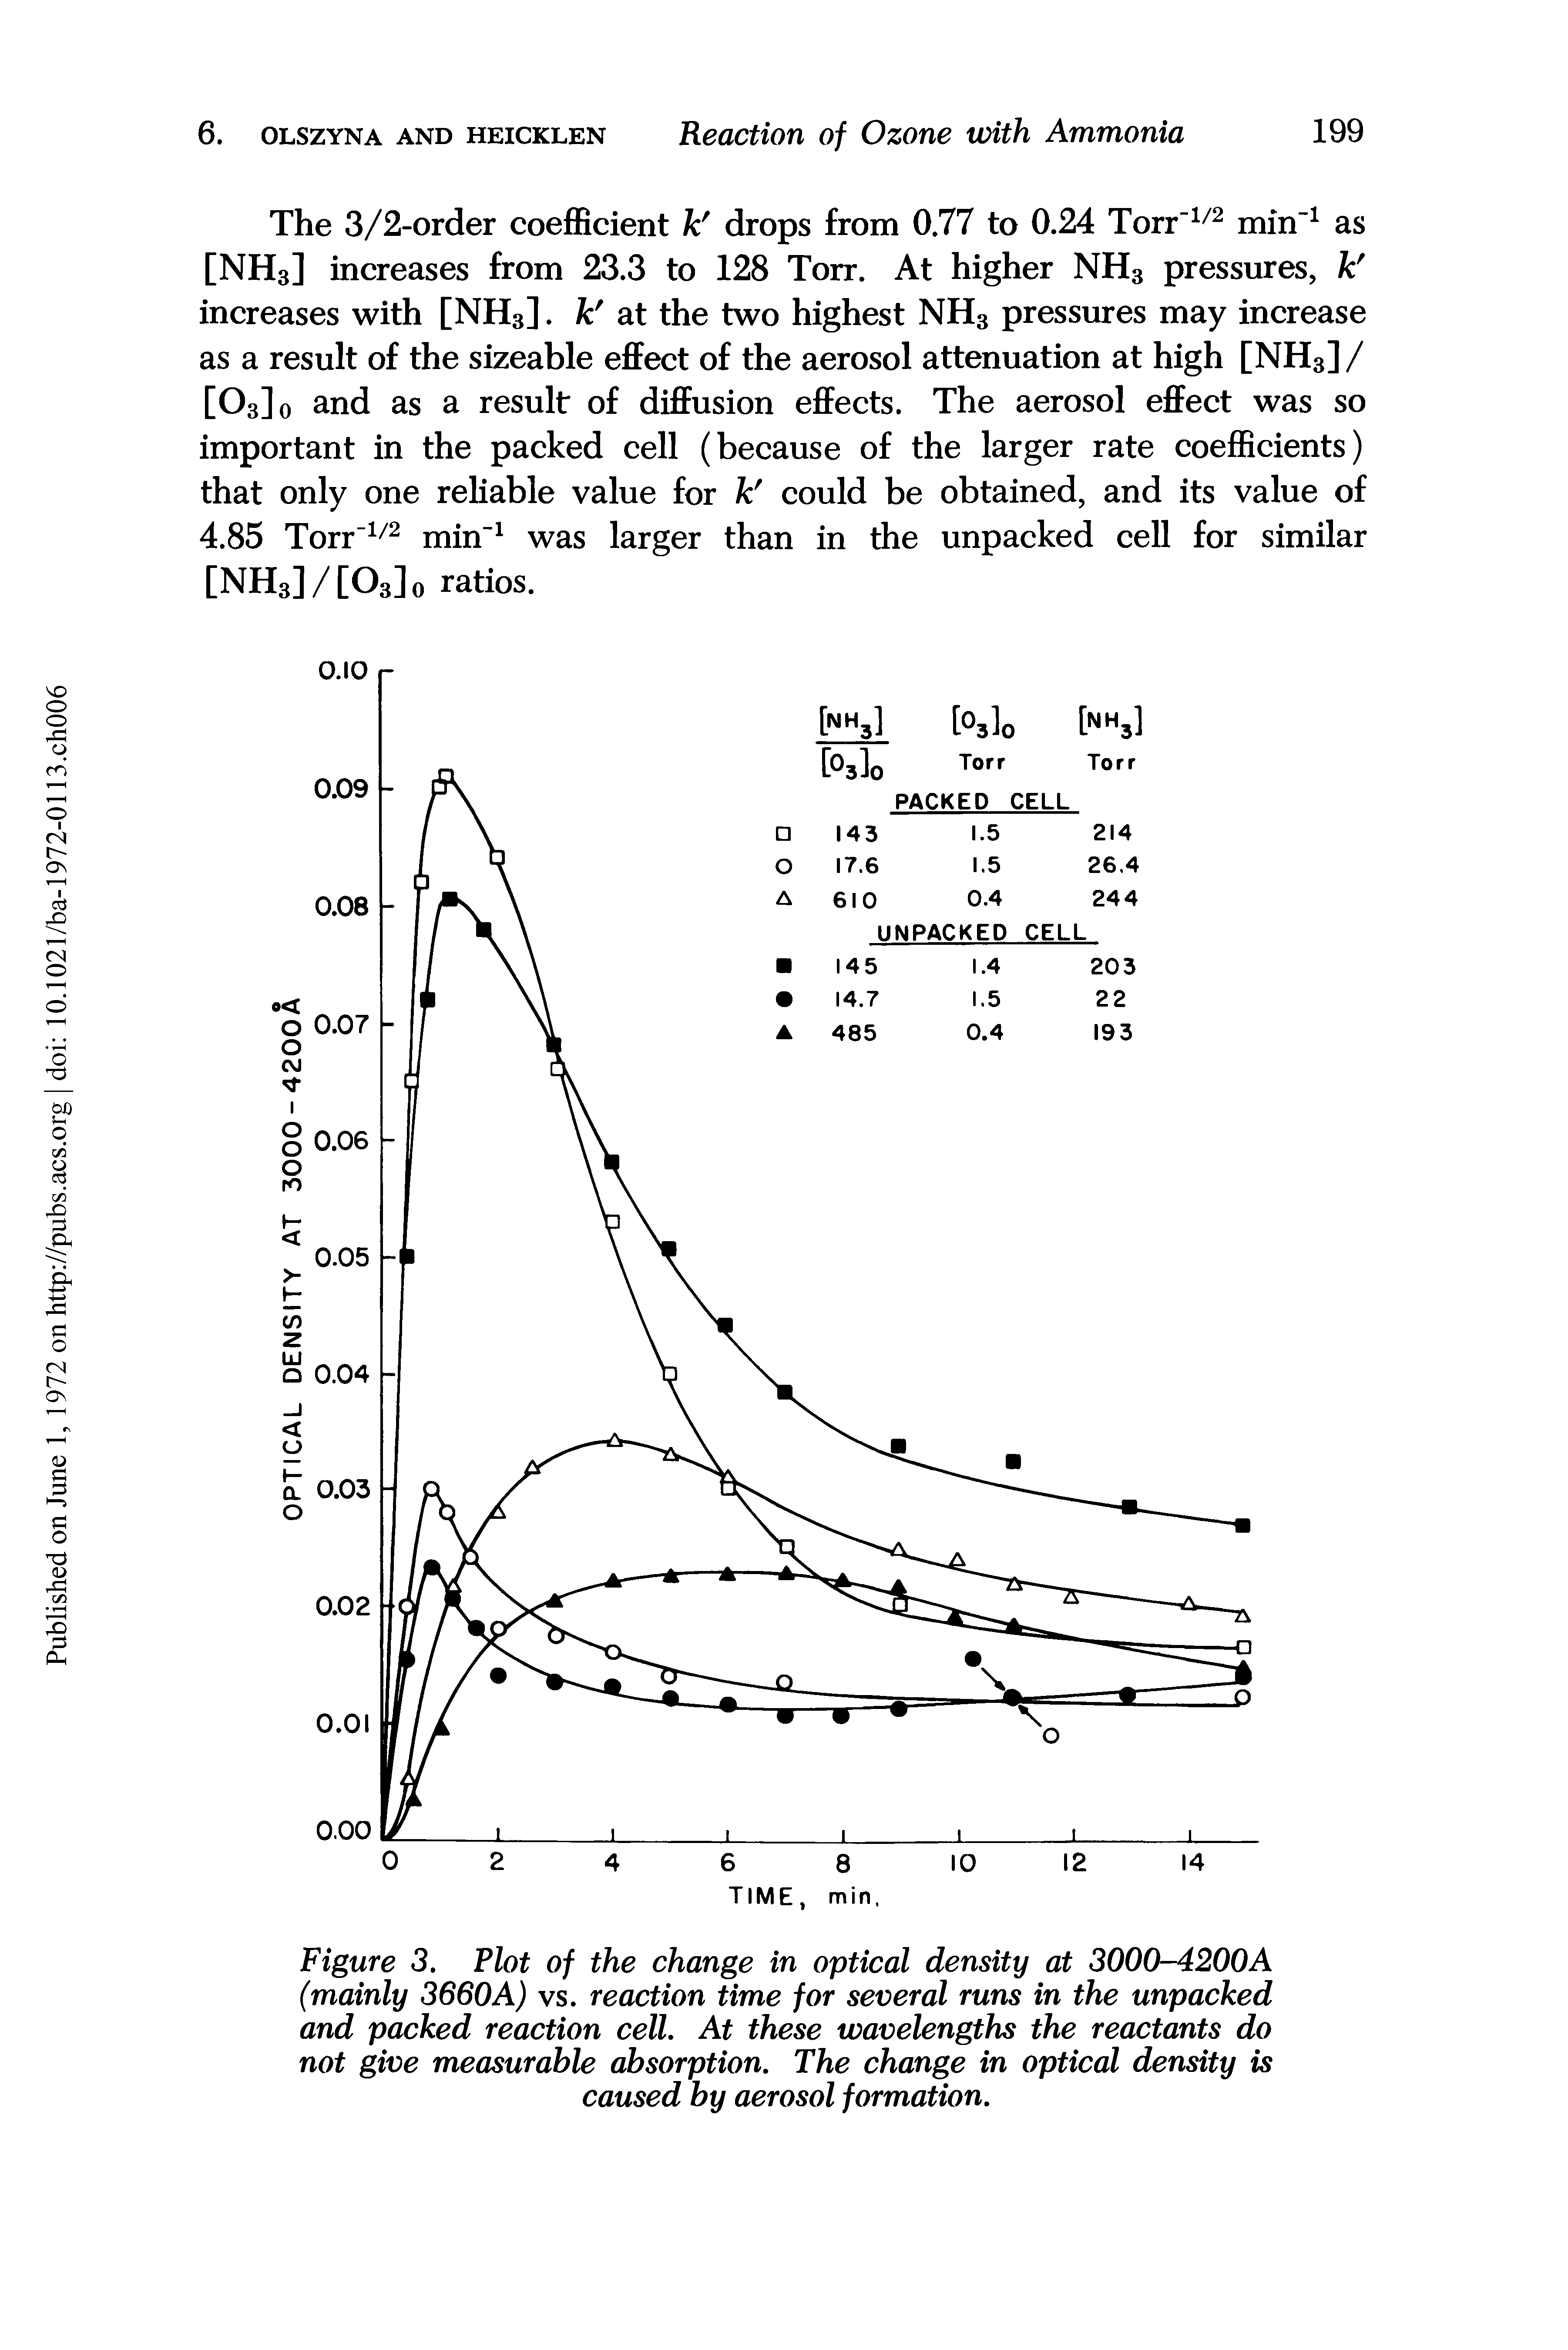 Figure 3. Plot of the change in optical density at 3000-4200A (mainly 3660A) vs. reaction time for several runs in the unpacked and packed reaction cell. At these wavelengths the reactants do not give measurable absorption. The change in optical density is caused by aerosol formation.